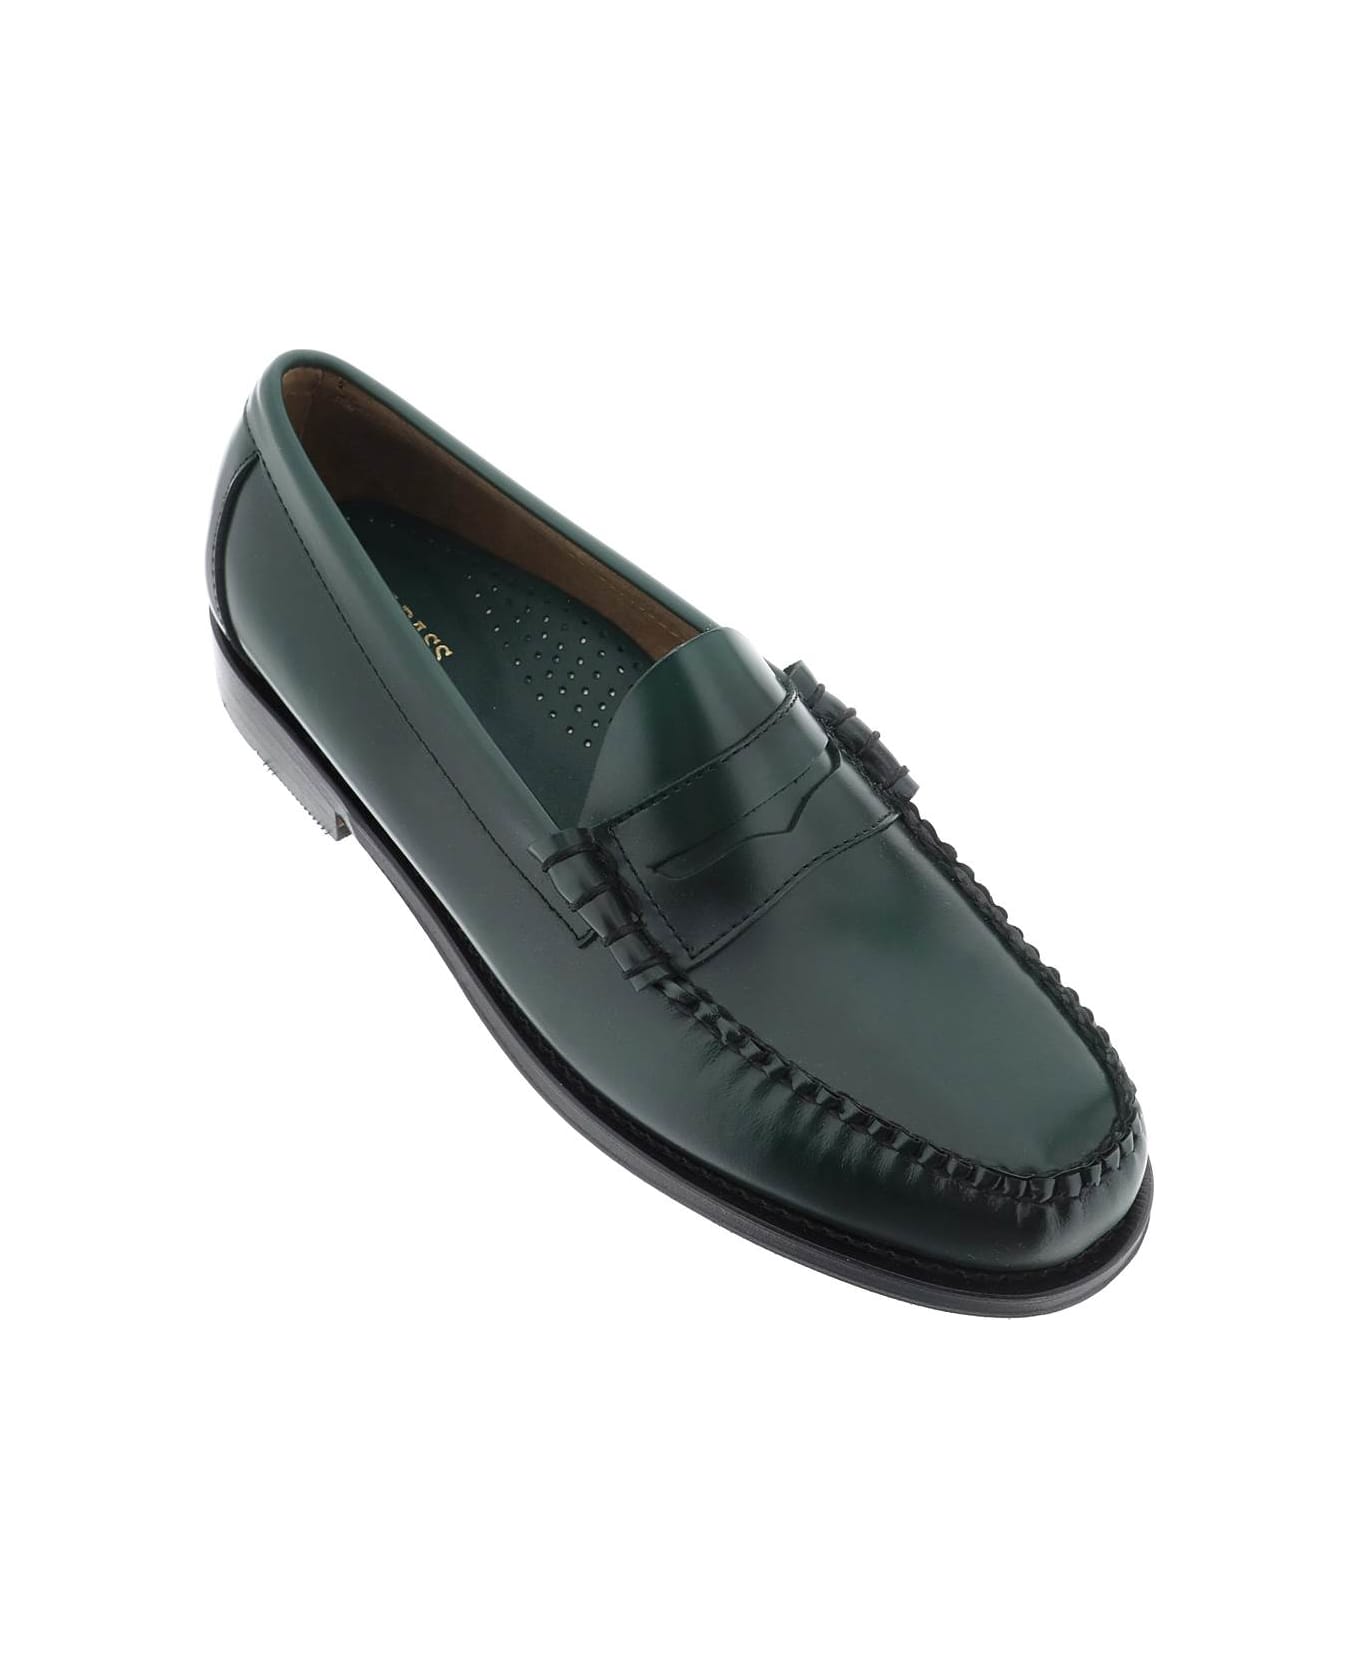 G.H.Bass & Co. Weejuns Larson Penny Loafers - GREEN (Green)